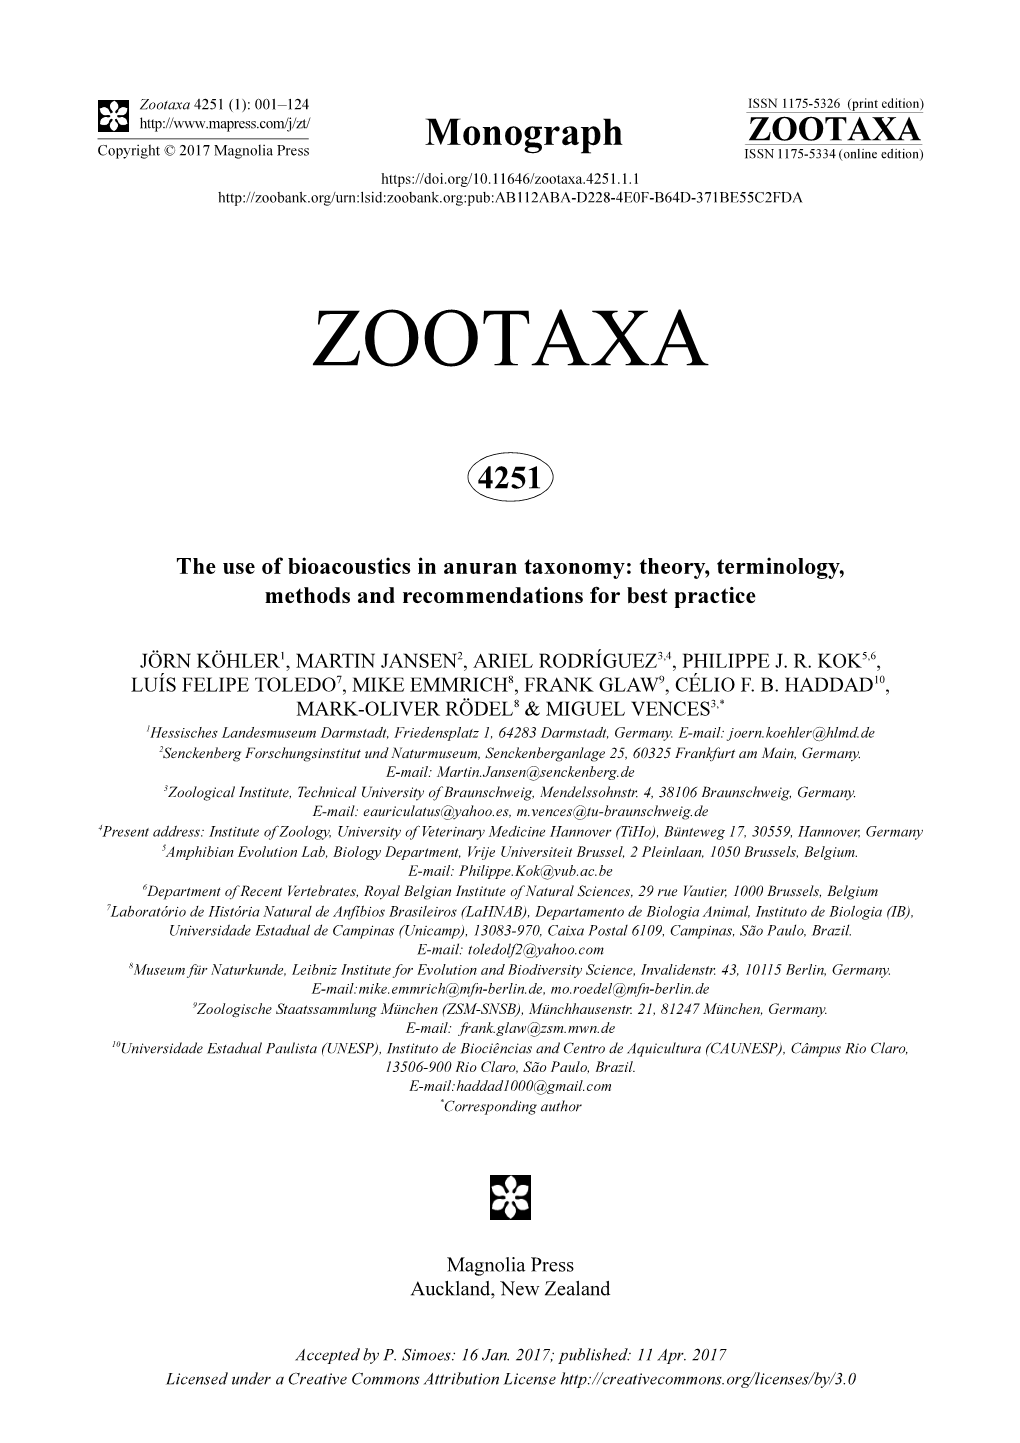 The Use of Bioacoustics in Anuran Taxonomy: Theory, Terminology, Methods and Recommendations for Best Practice